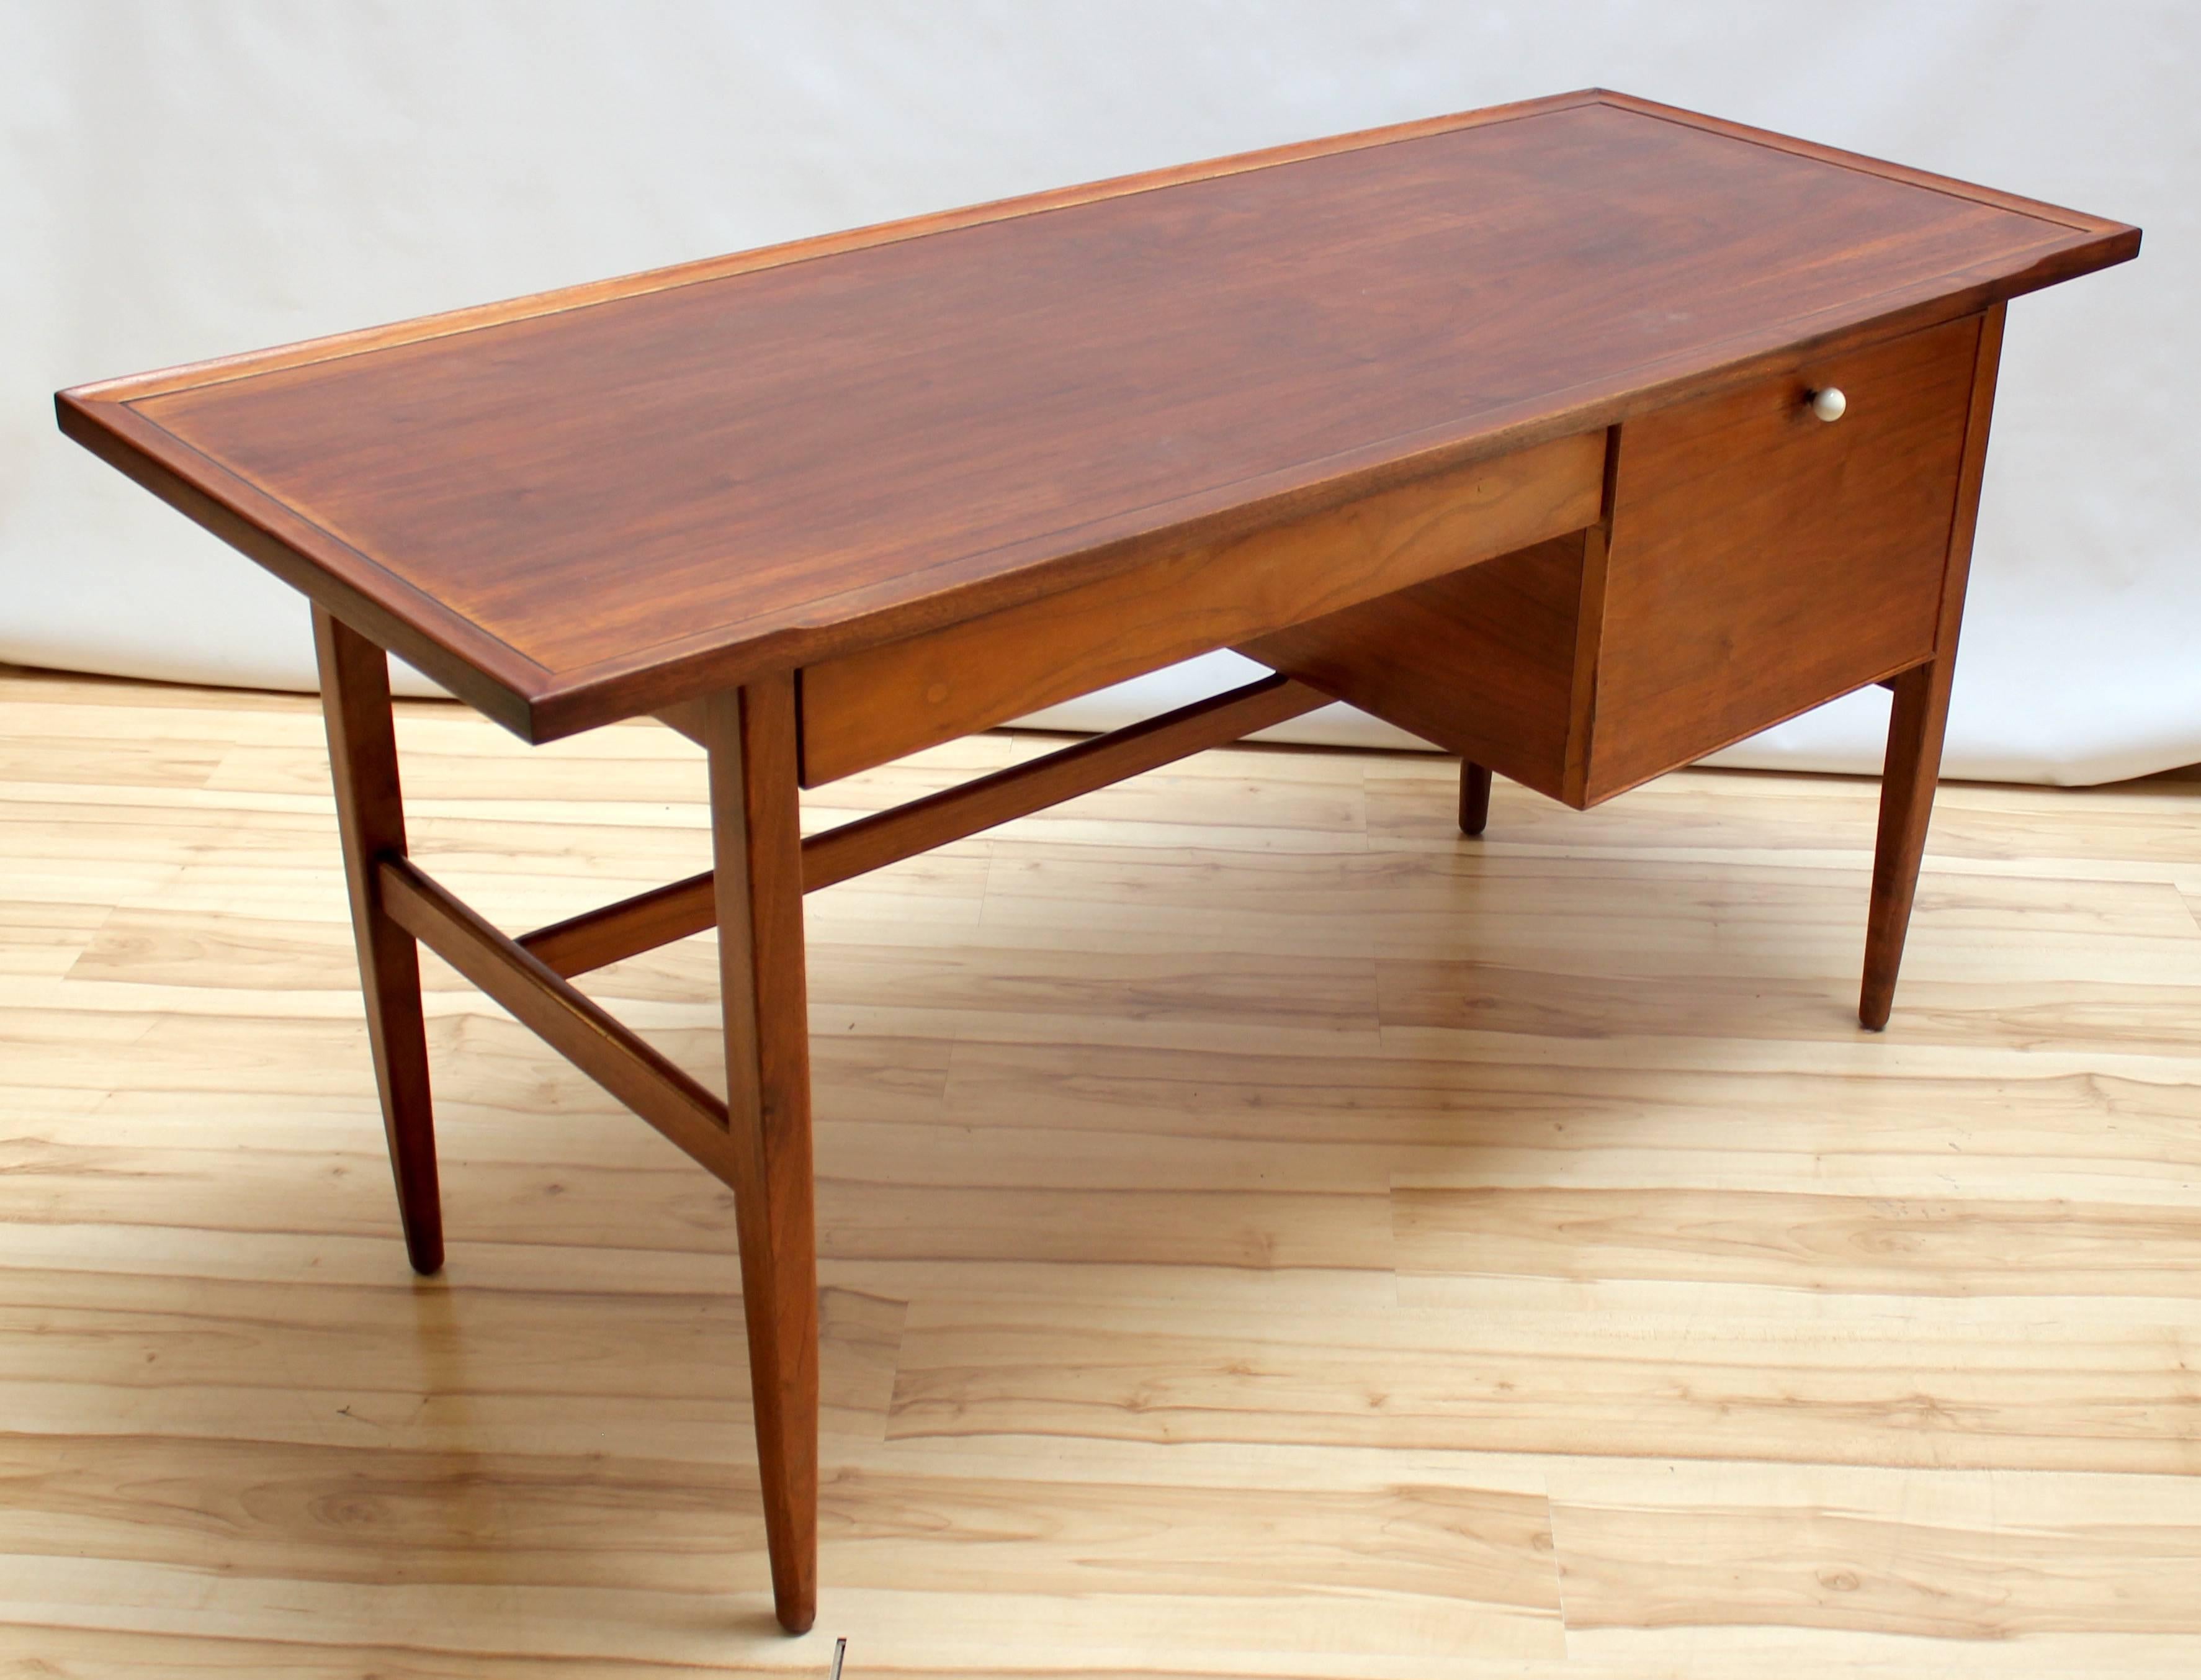 1950s Drexel Declaration desk designed by Kipp Stewart and Stewart McDougall. Desk has one drawer and one filing drawer with white porcelain pull. Very small loss of veneer on back corner.